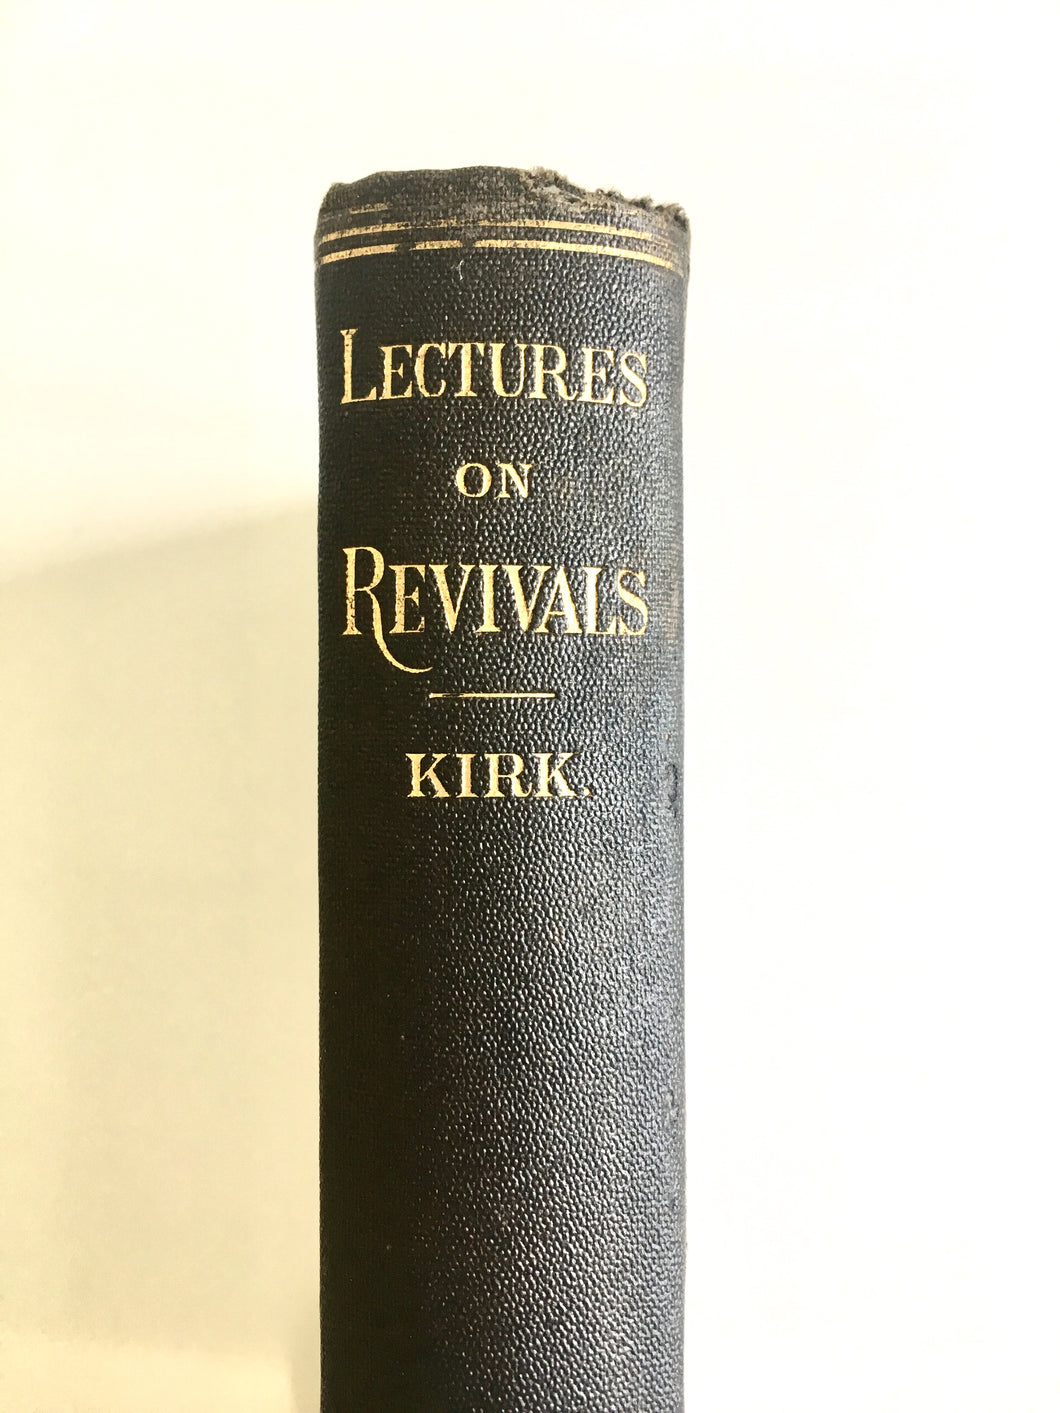 1875 E. N. KIRK. Lectures on Revivals. Co-worker with Finney. Led D. L. Moody to Christ